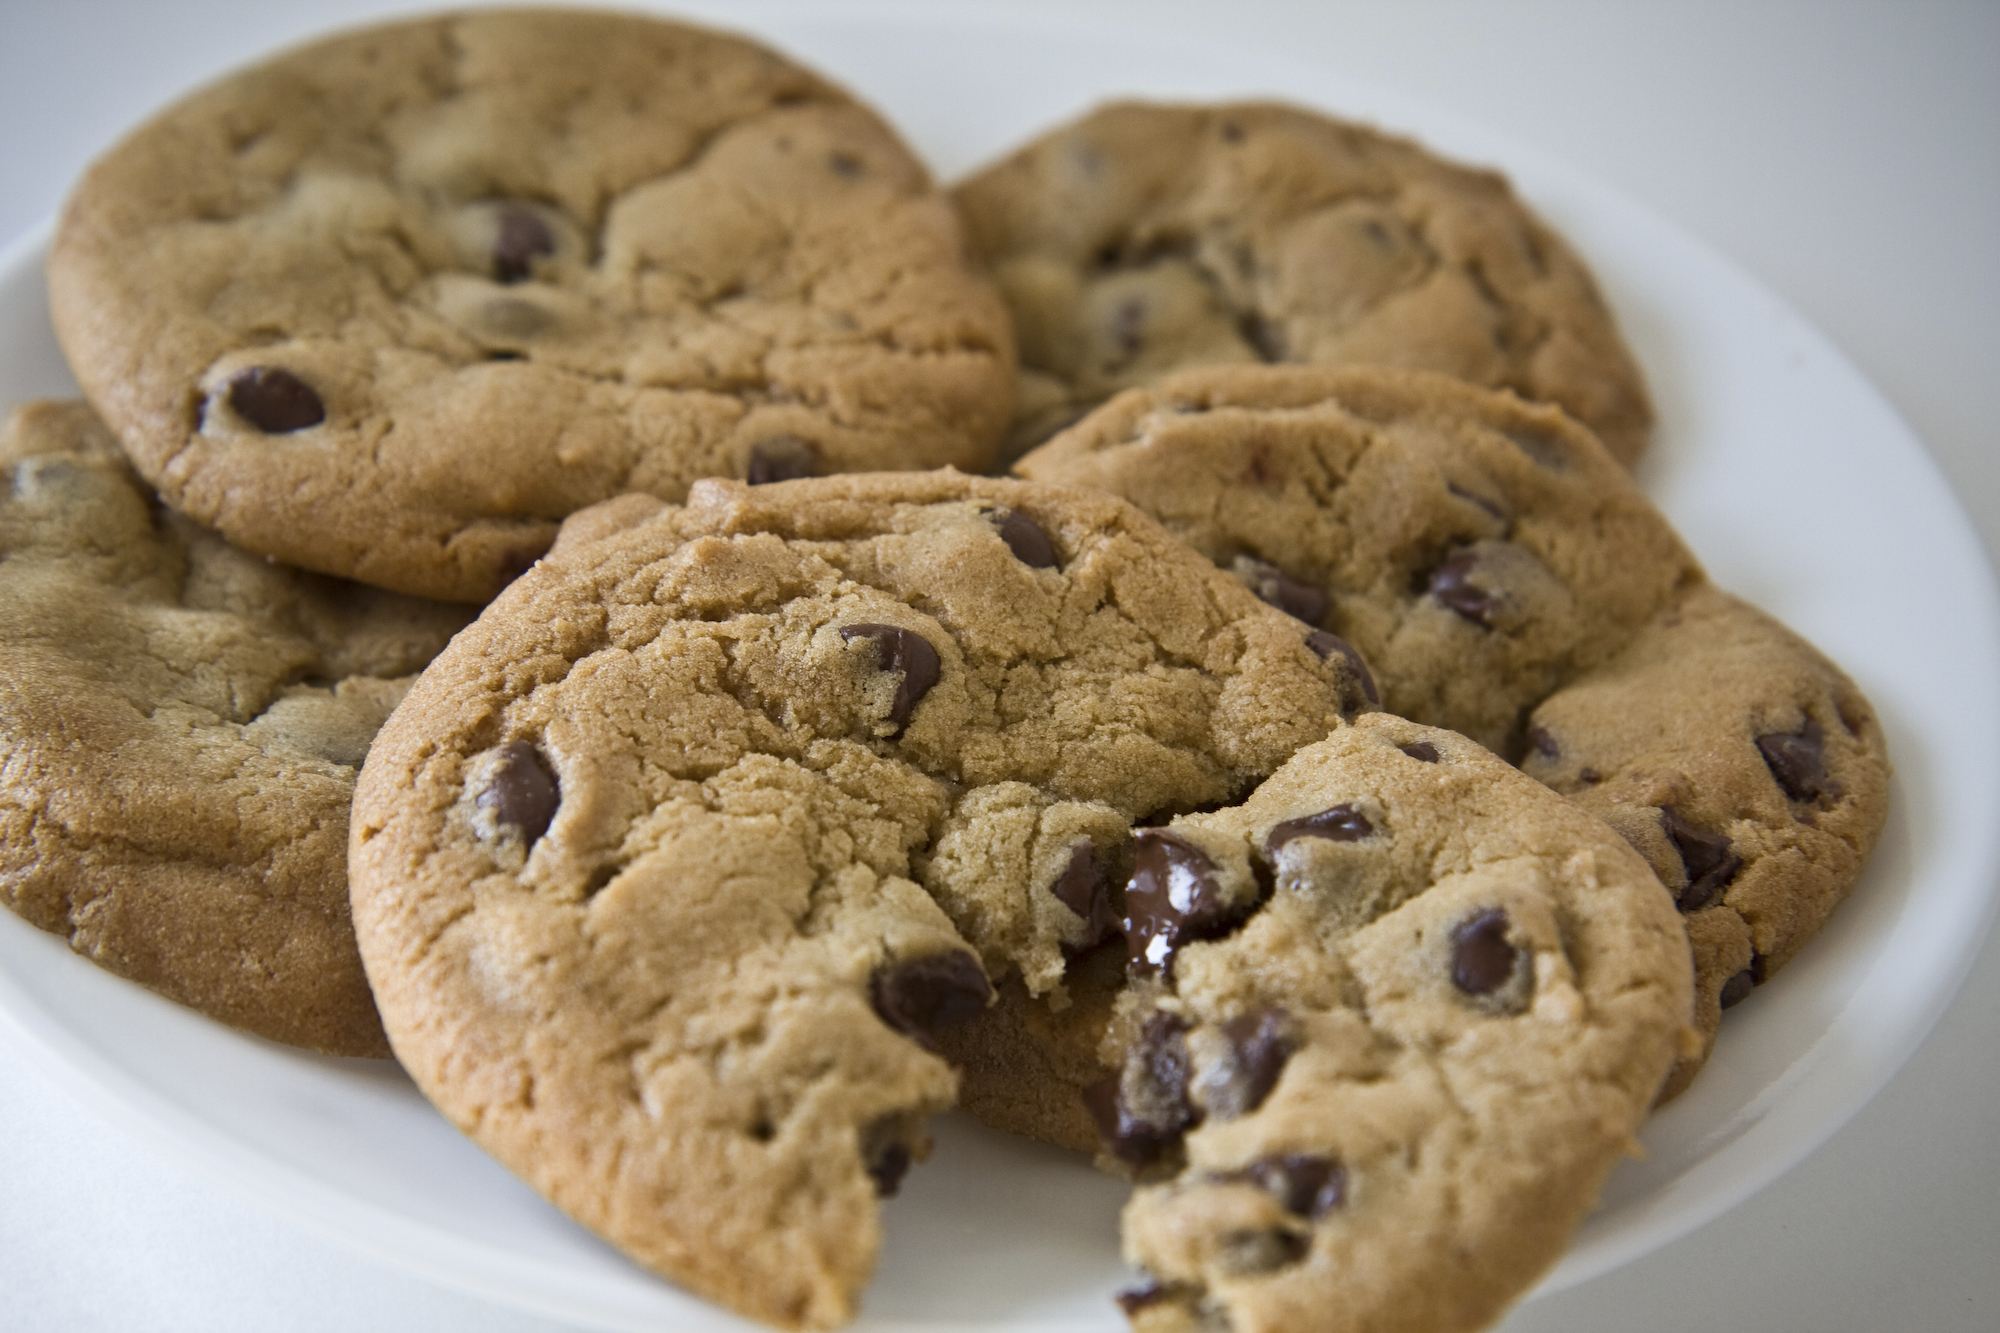 Warm cookie company Tiff's Treats gets sweet delivery: $11 million ...